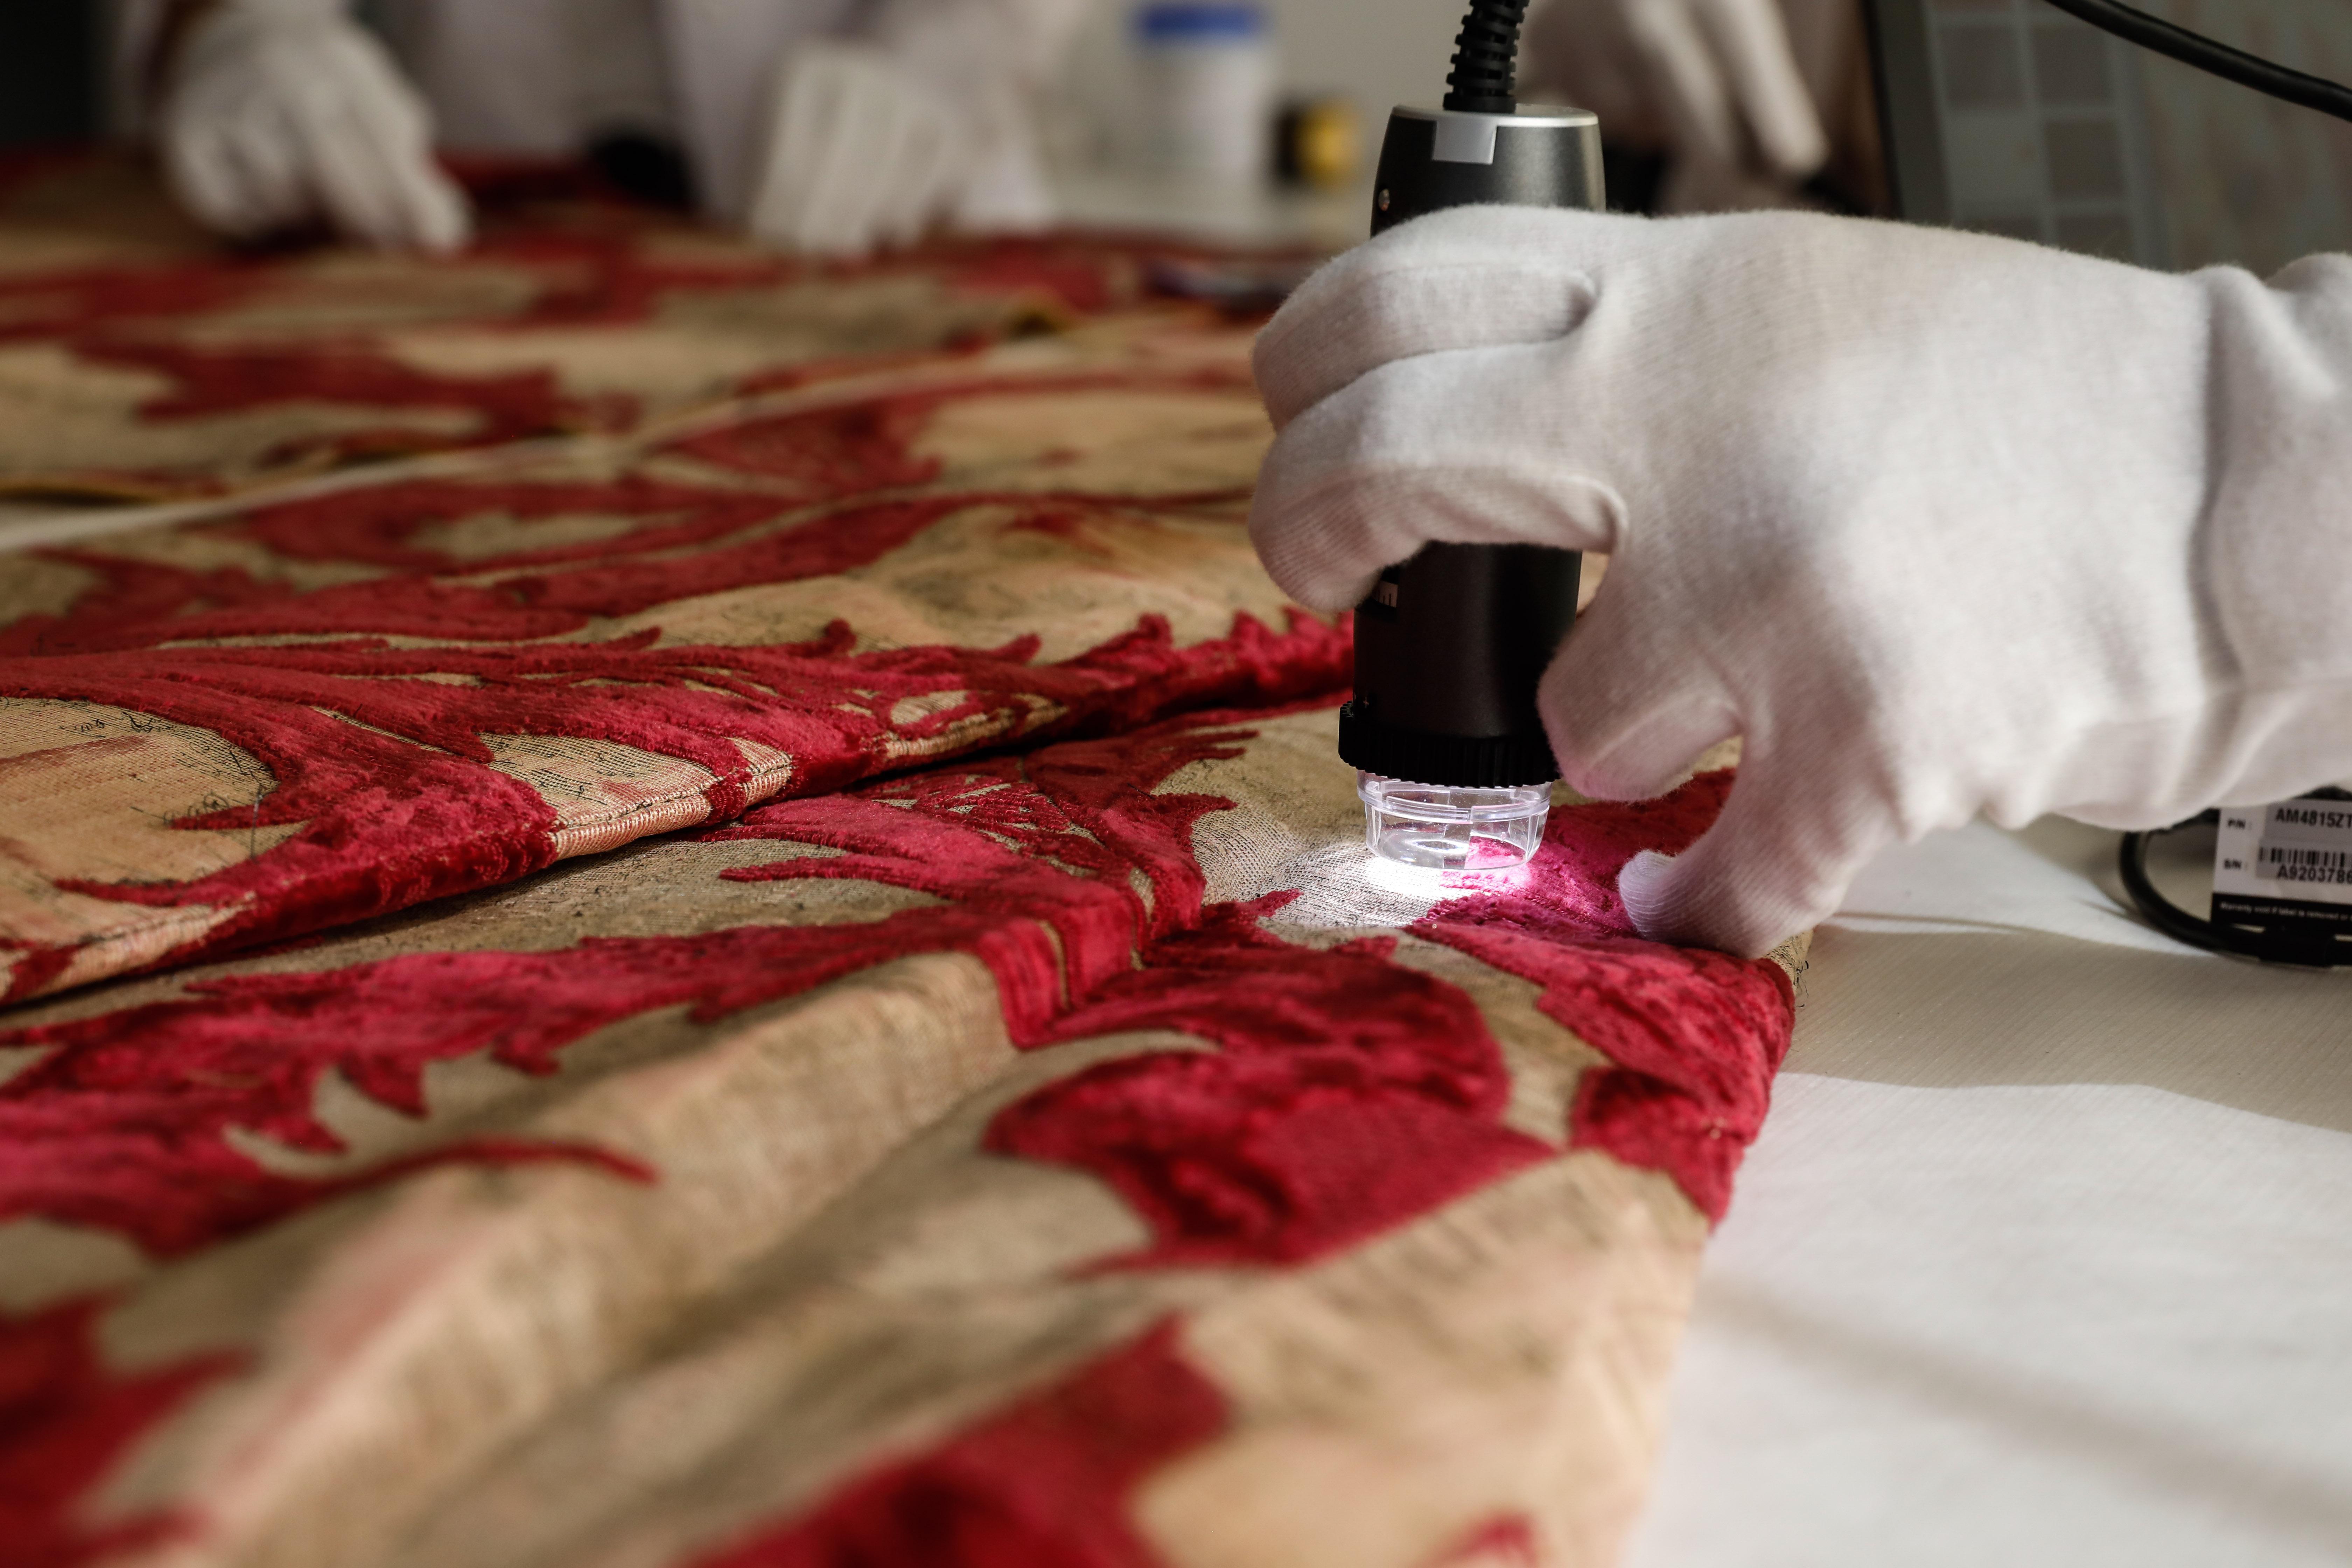 The caftan of Suleiman the Magnificent is being restored